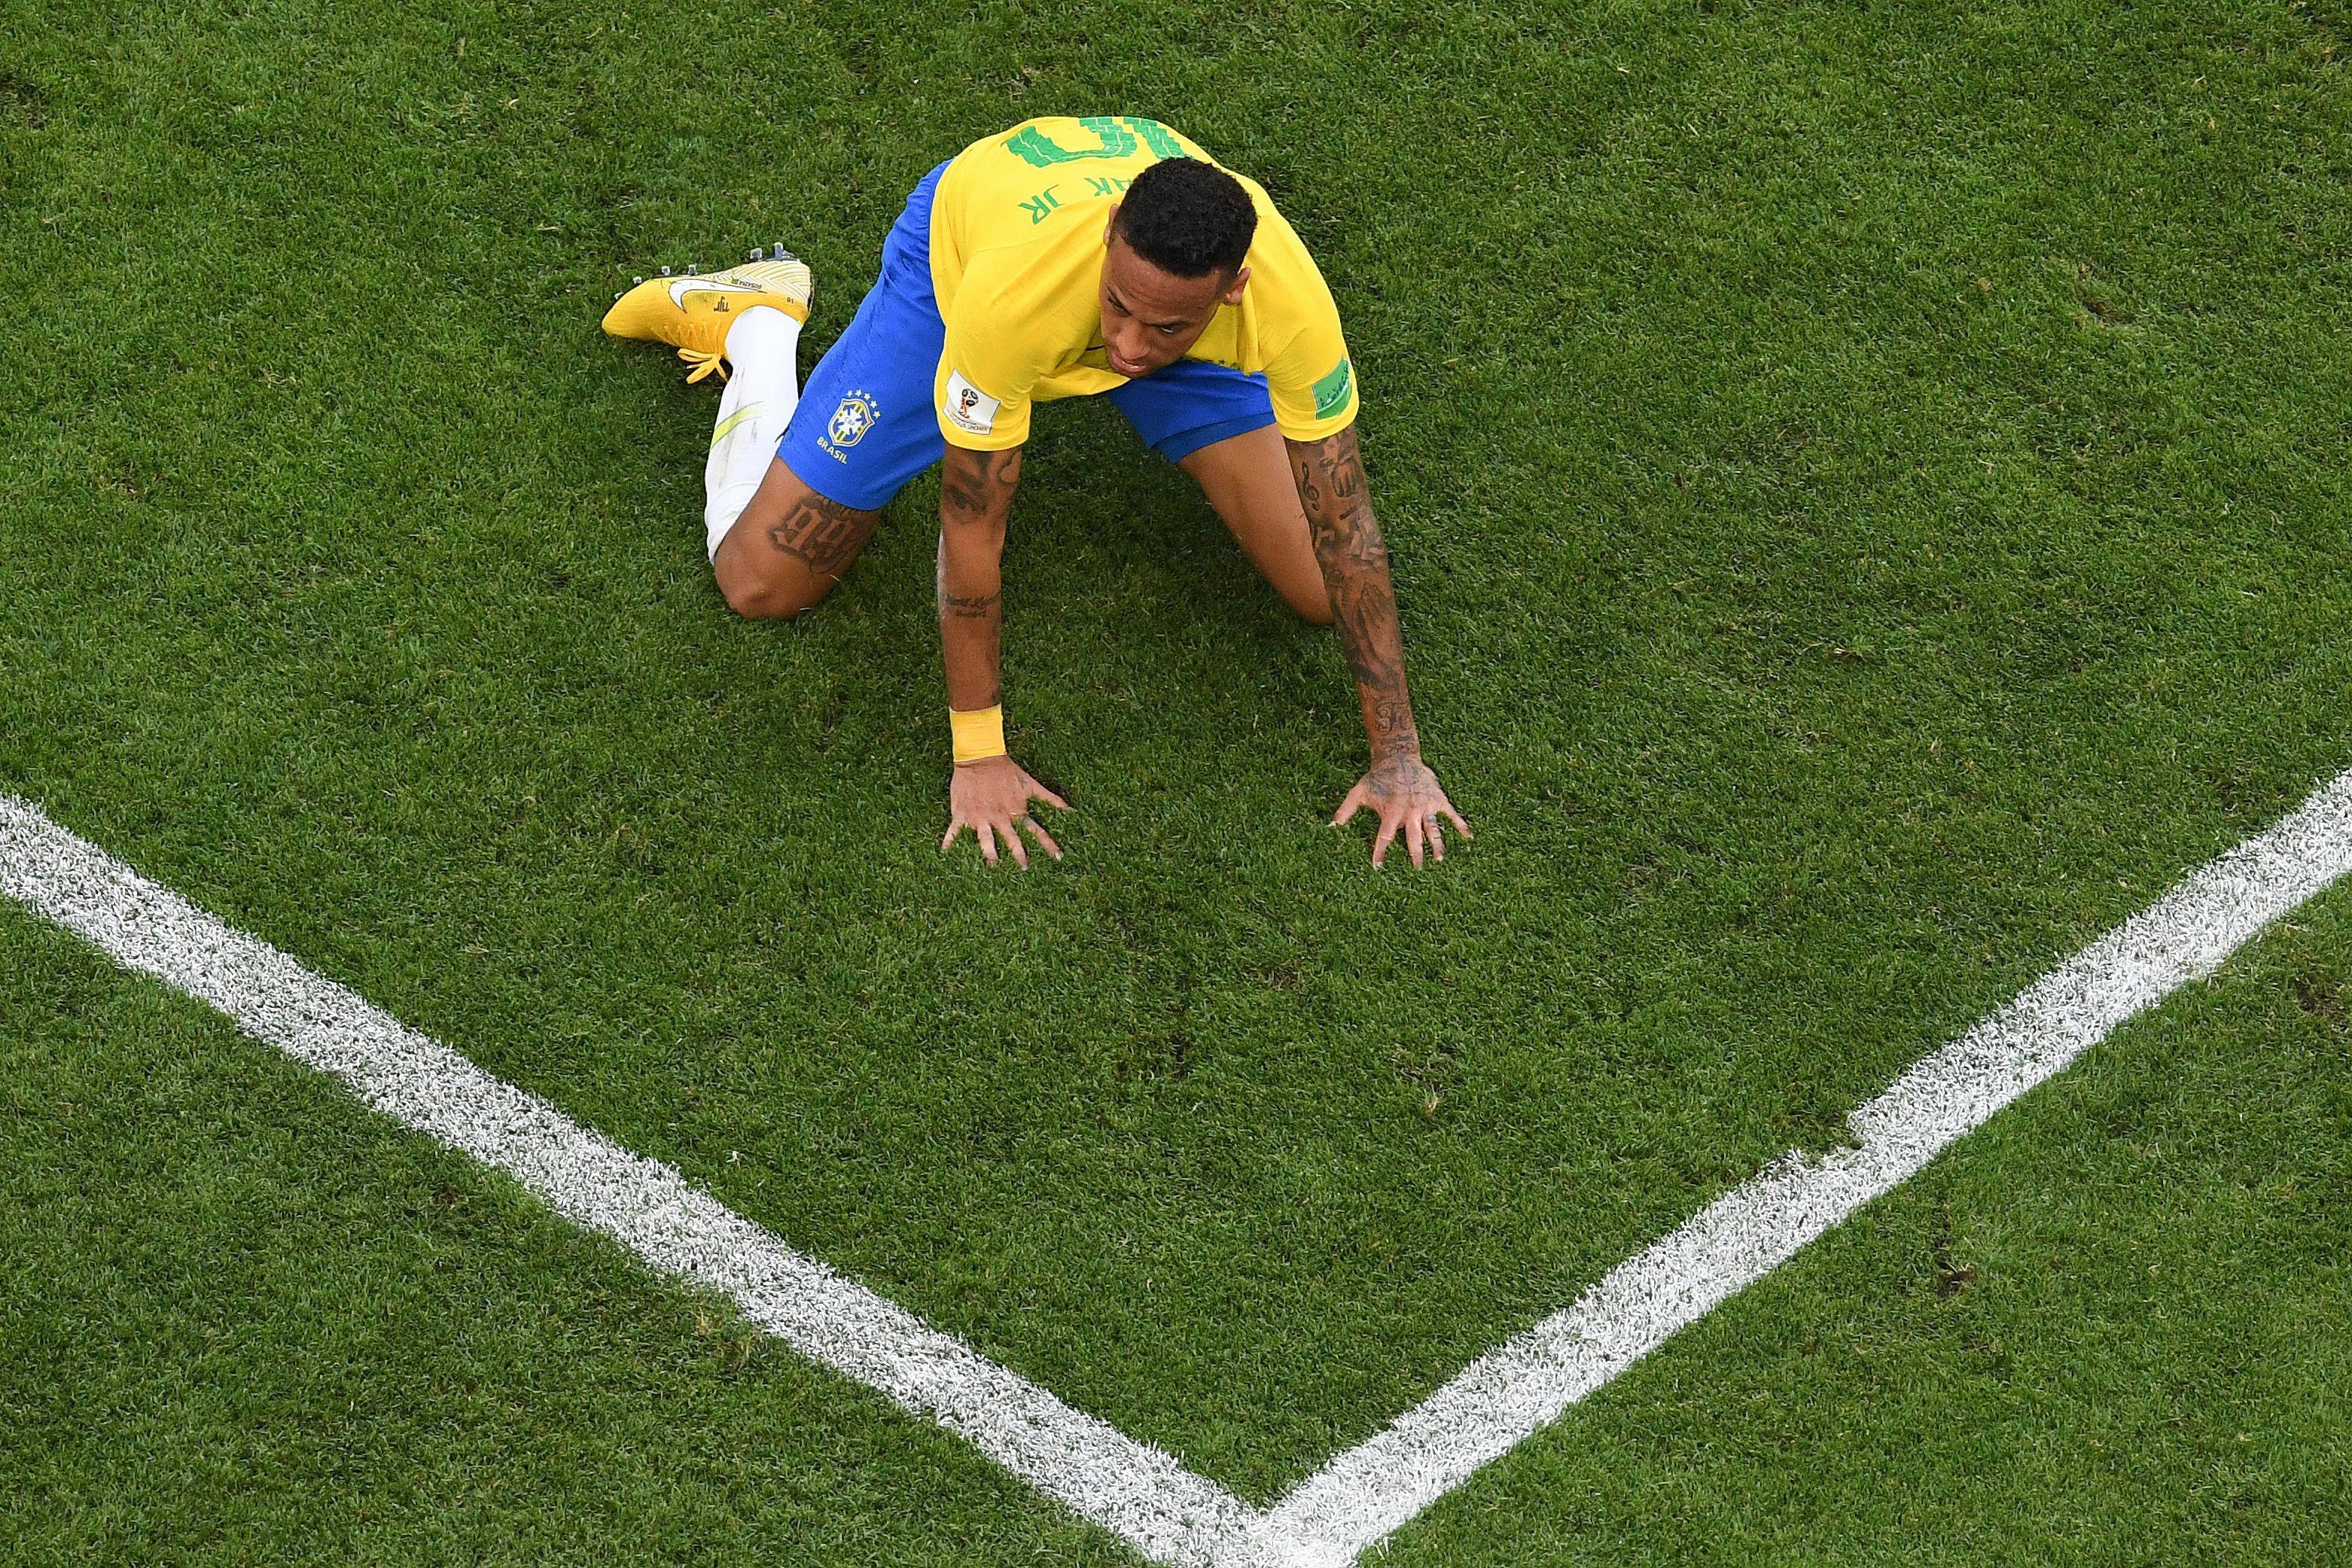 Neymar's diving at the World Cup means he has spent 14 minutes on the ground so far for Brazil